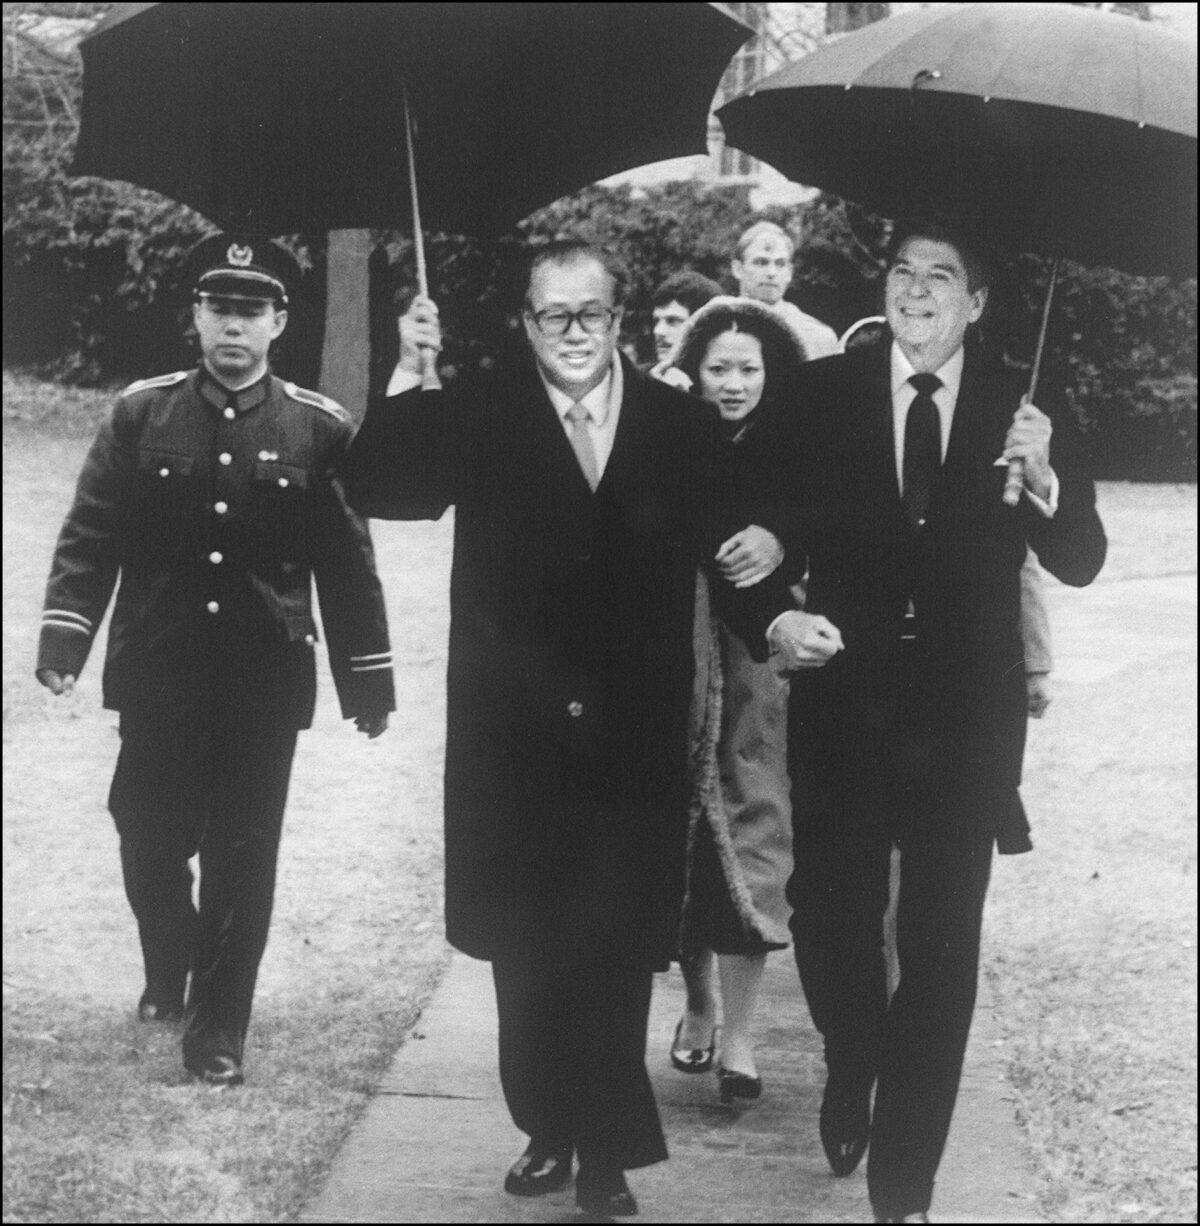 U.S. President Ronald Reagan (R) and Chinese Premier Zhao Ziyang, both holding umbrellas, walk arm in arm, as Reagan escorts him to his car through the rain after a meeting in the Cabinet Room in the White House, in Washington, on Oct. 1, 1984. (AFP/AFP via Getty Images)